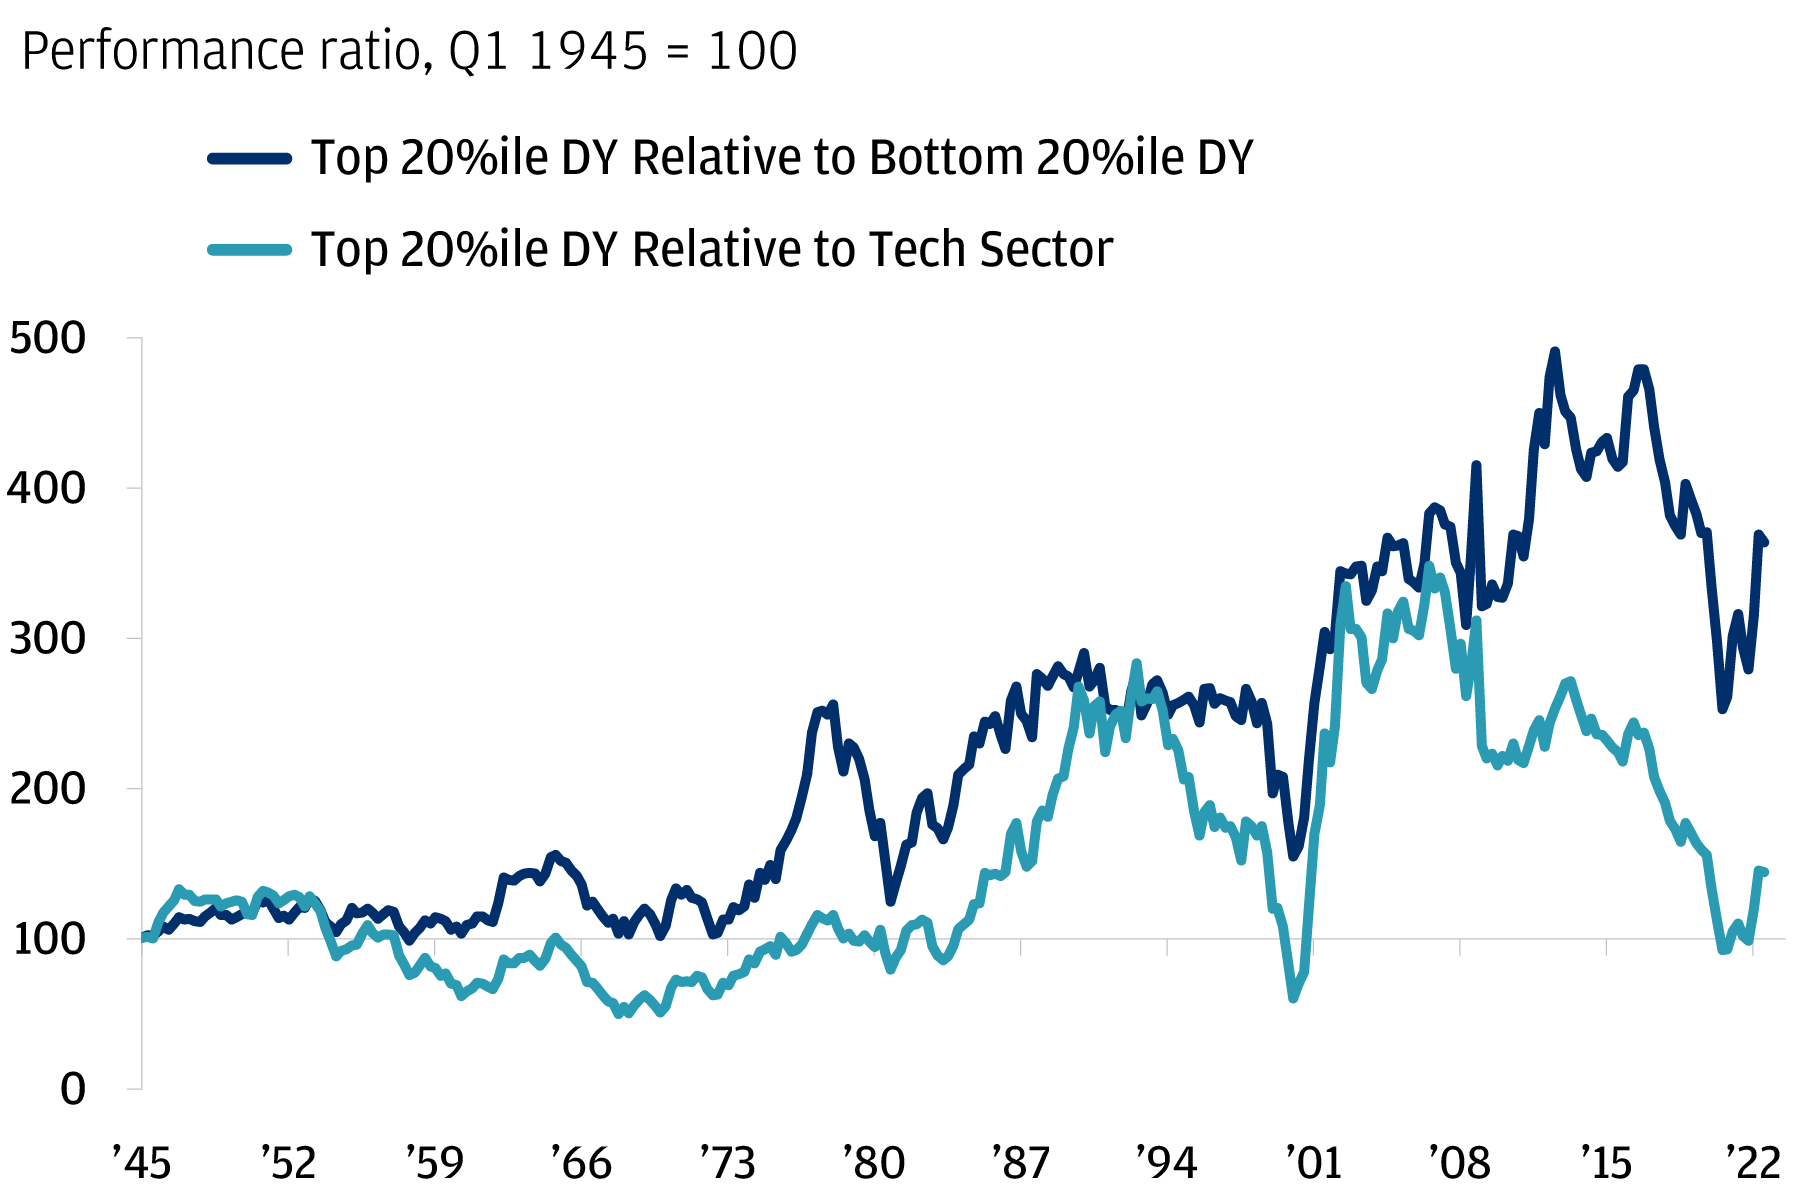 The chart shows the performance ratio of stocks in the top 20 percentile of dividend yield relative to stocks in the bottom 20 percentile of dividend yield. 